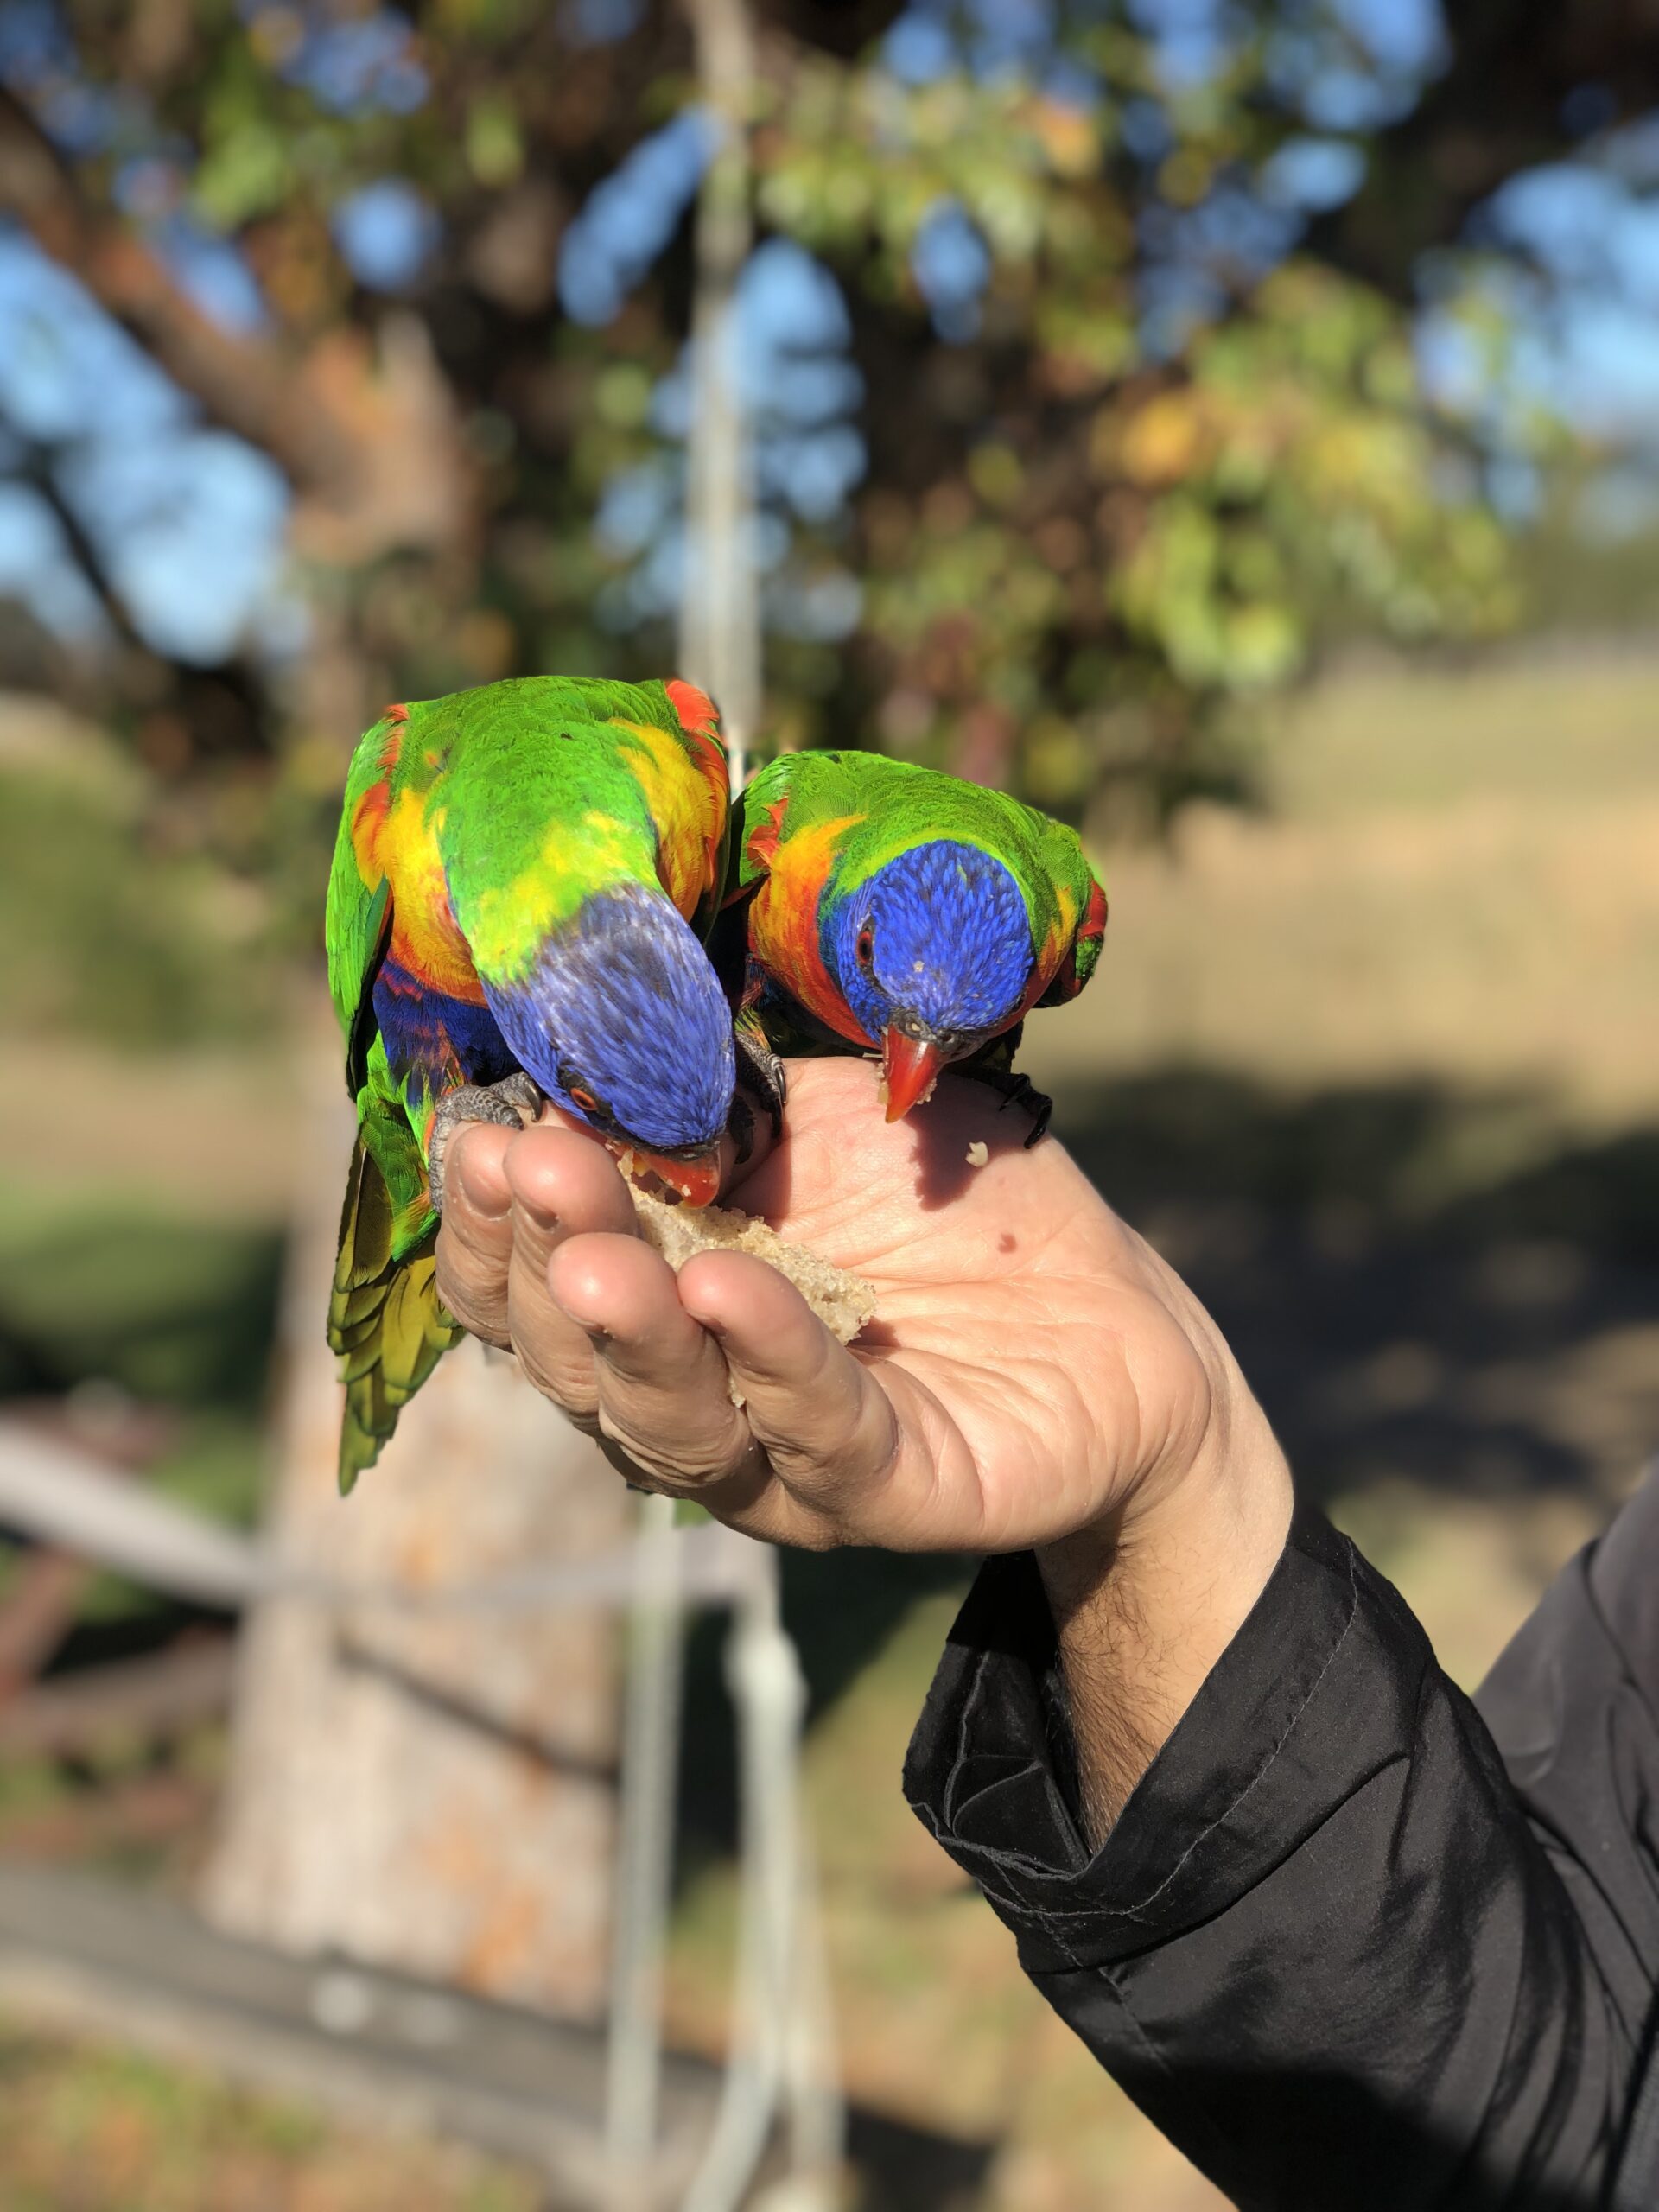 Lorikeets having some treats from a person's hand